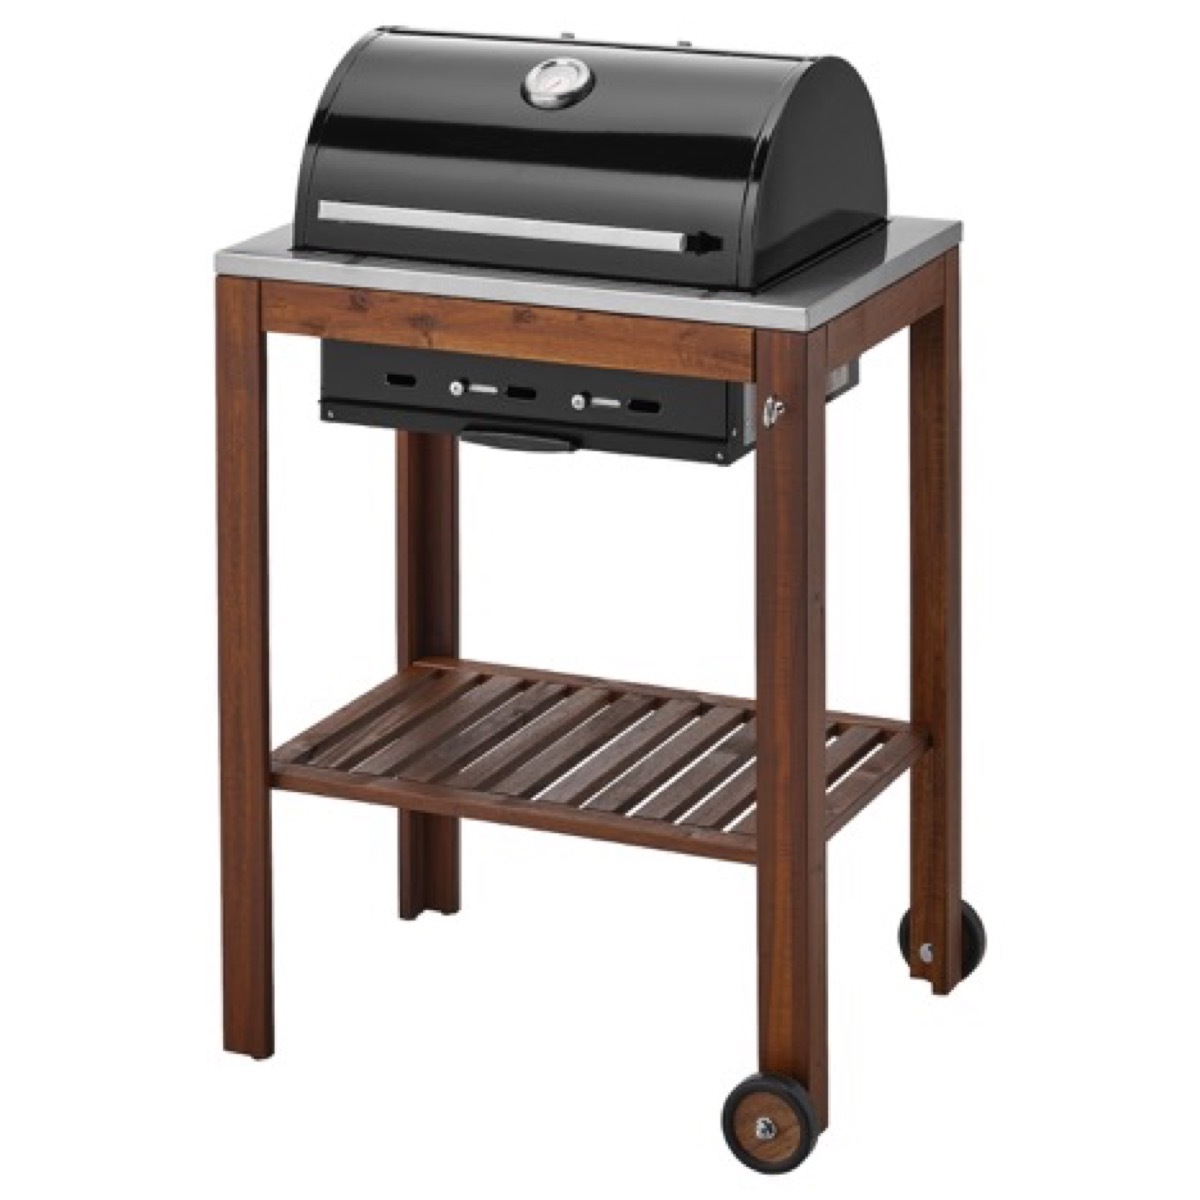 Ikea grill with wooden surround